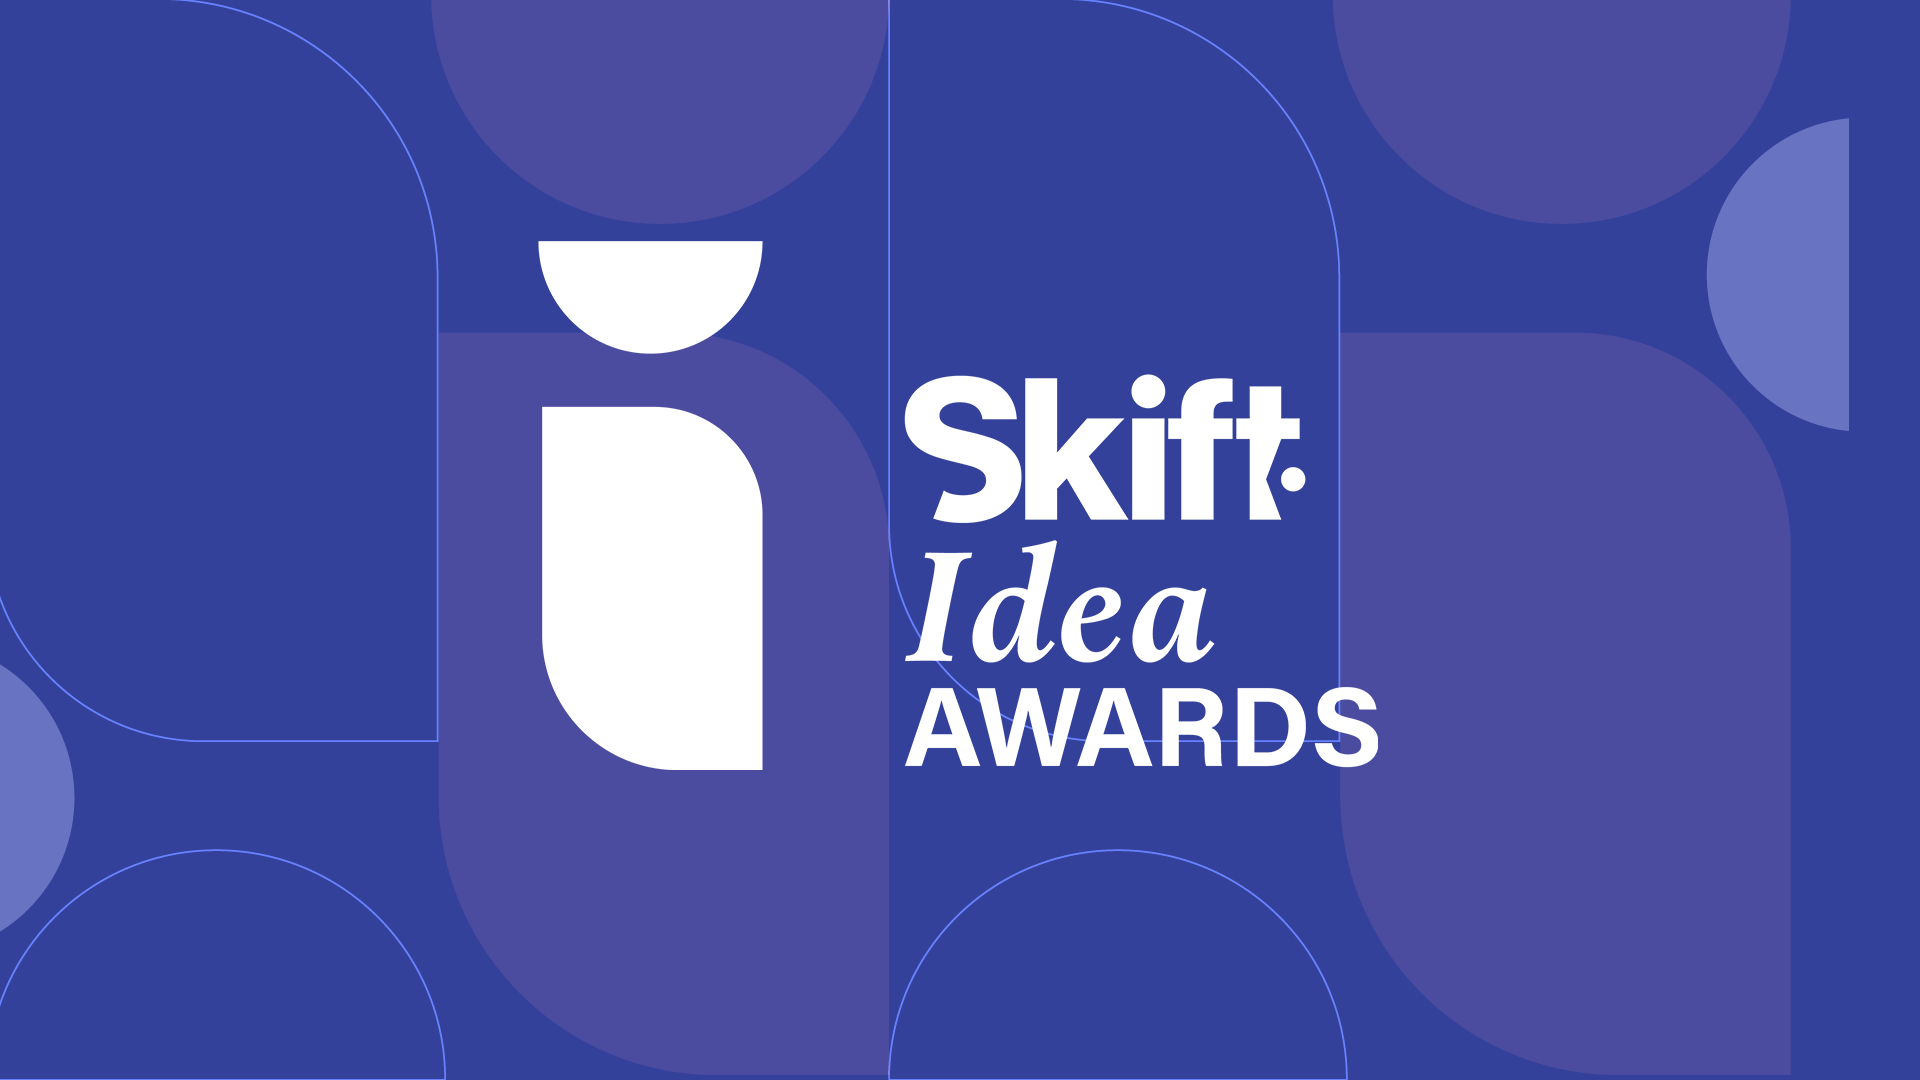 Skift IDEA Awards 2022 - Honoring Top Travel Industry Projects ...